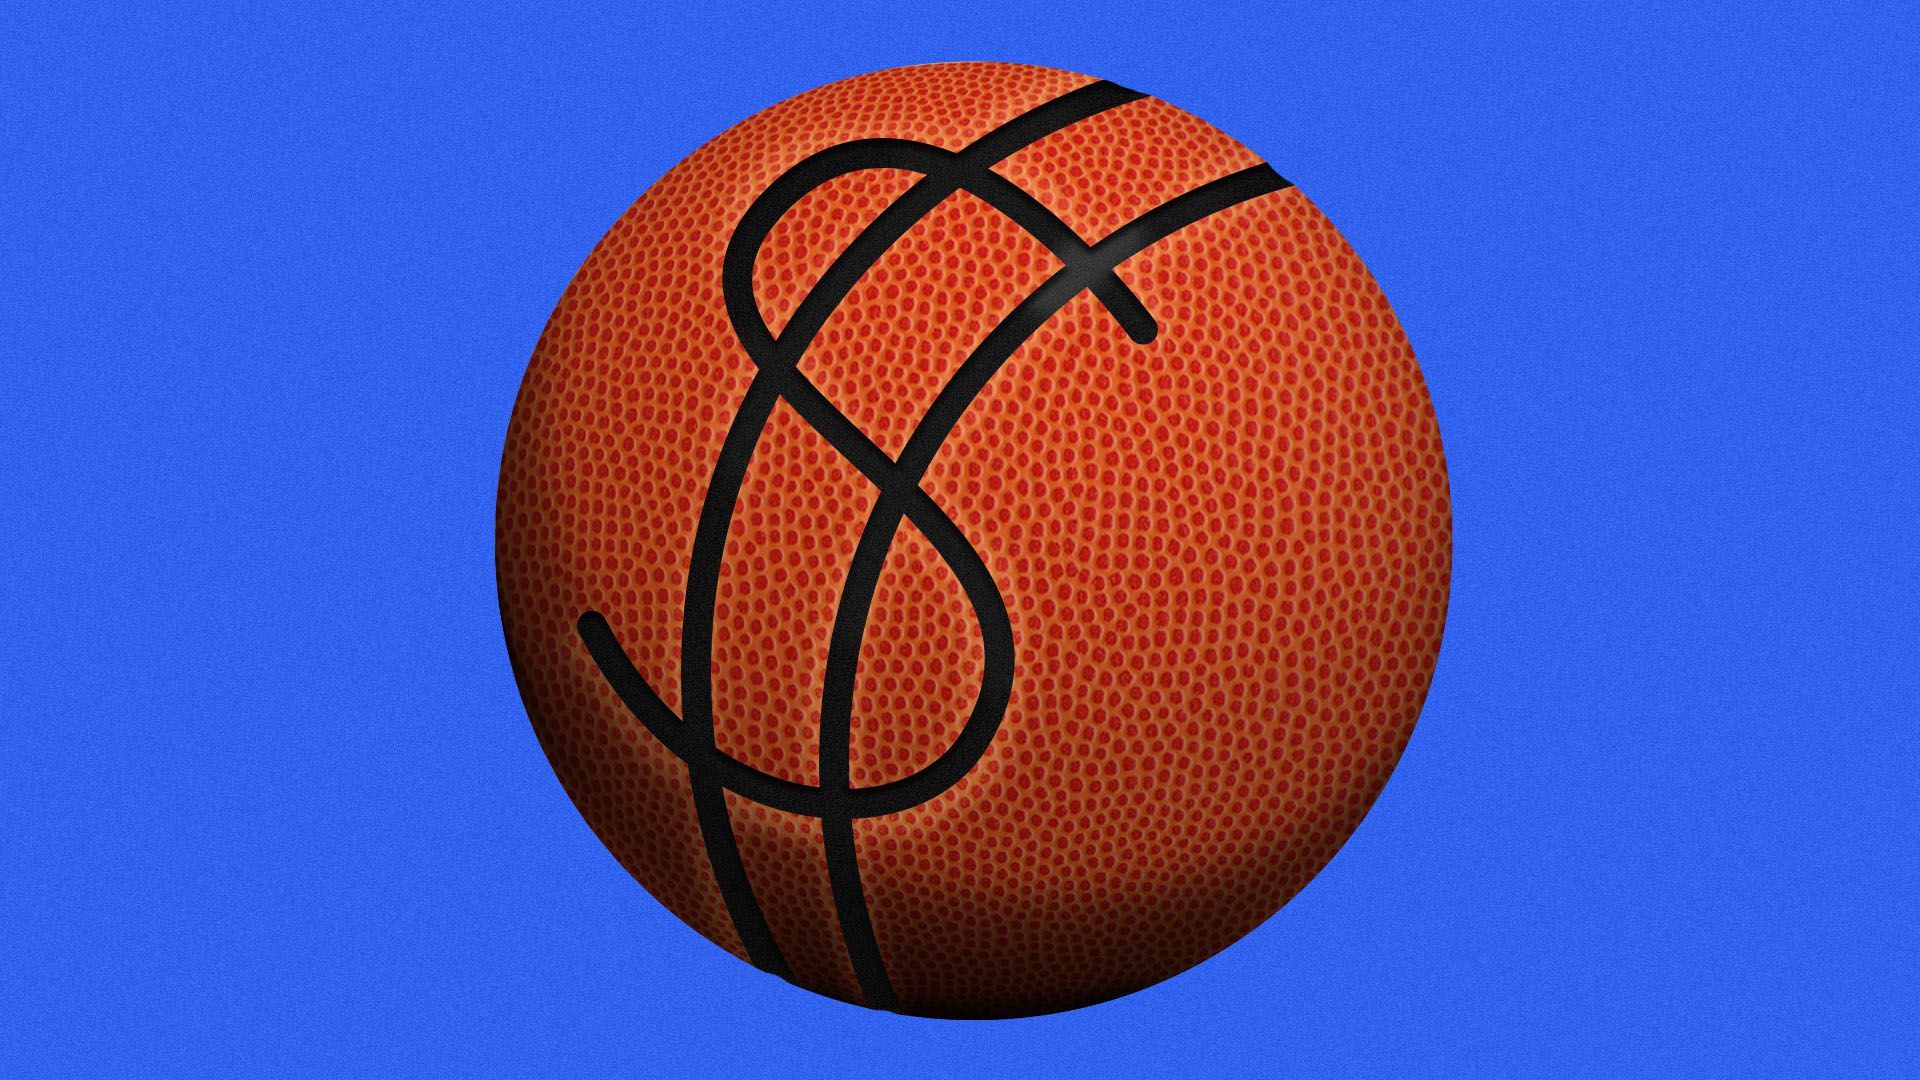 Illustration of a basketball with the seam shaped like a dollar symbol